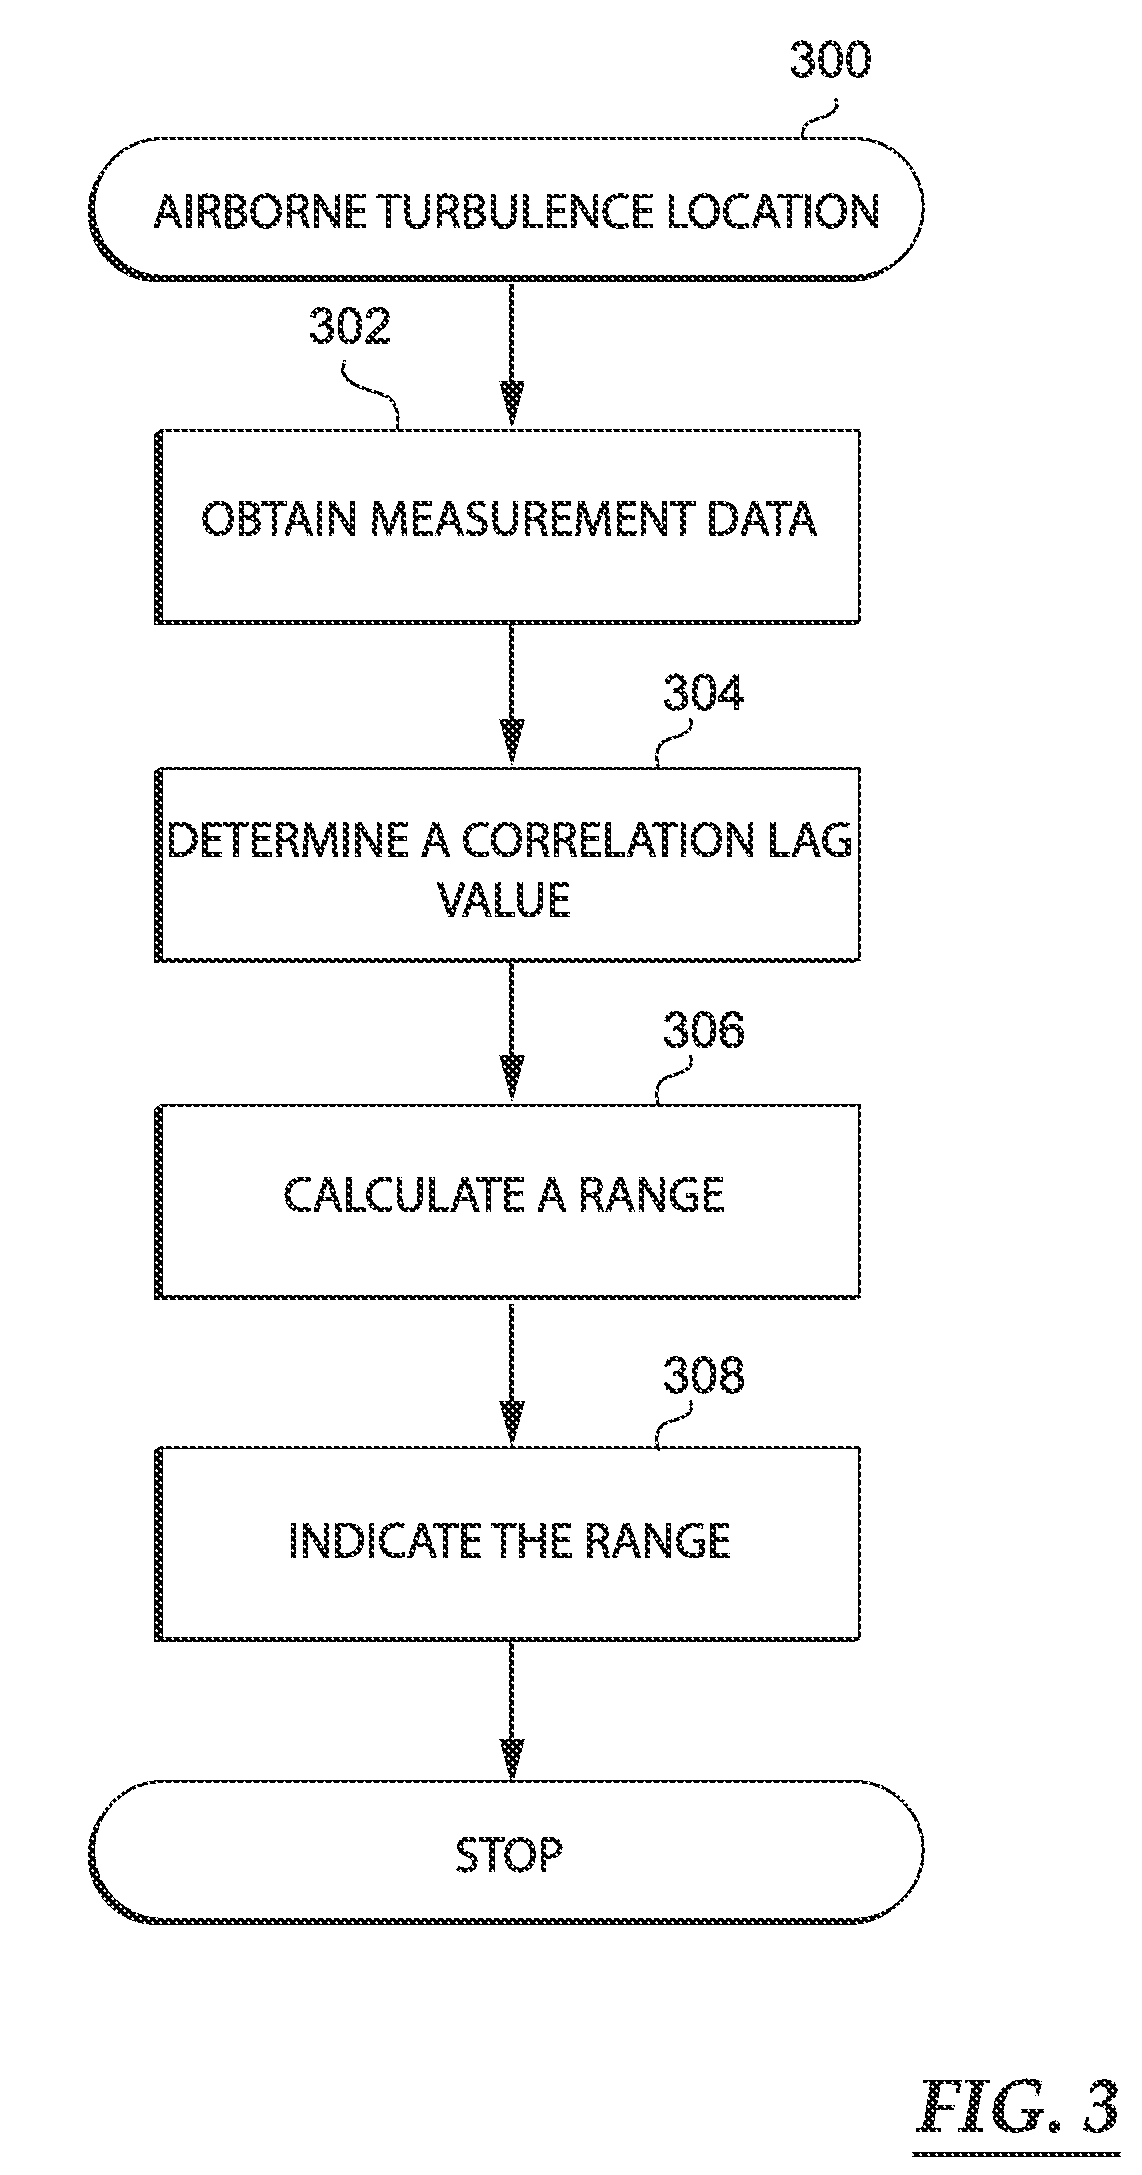 Airborne turbulence location system and methods